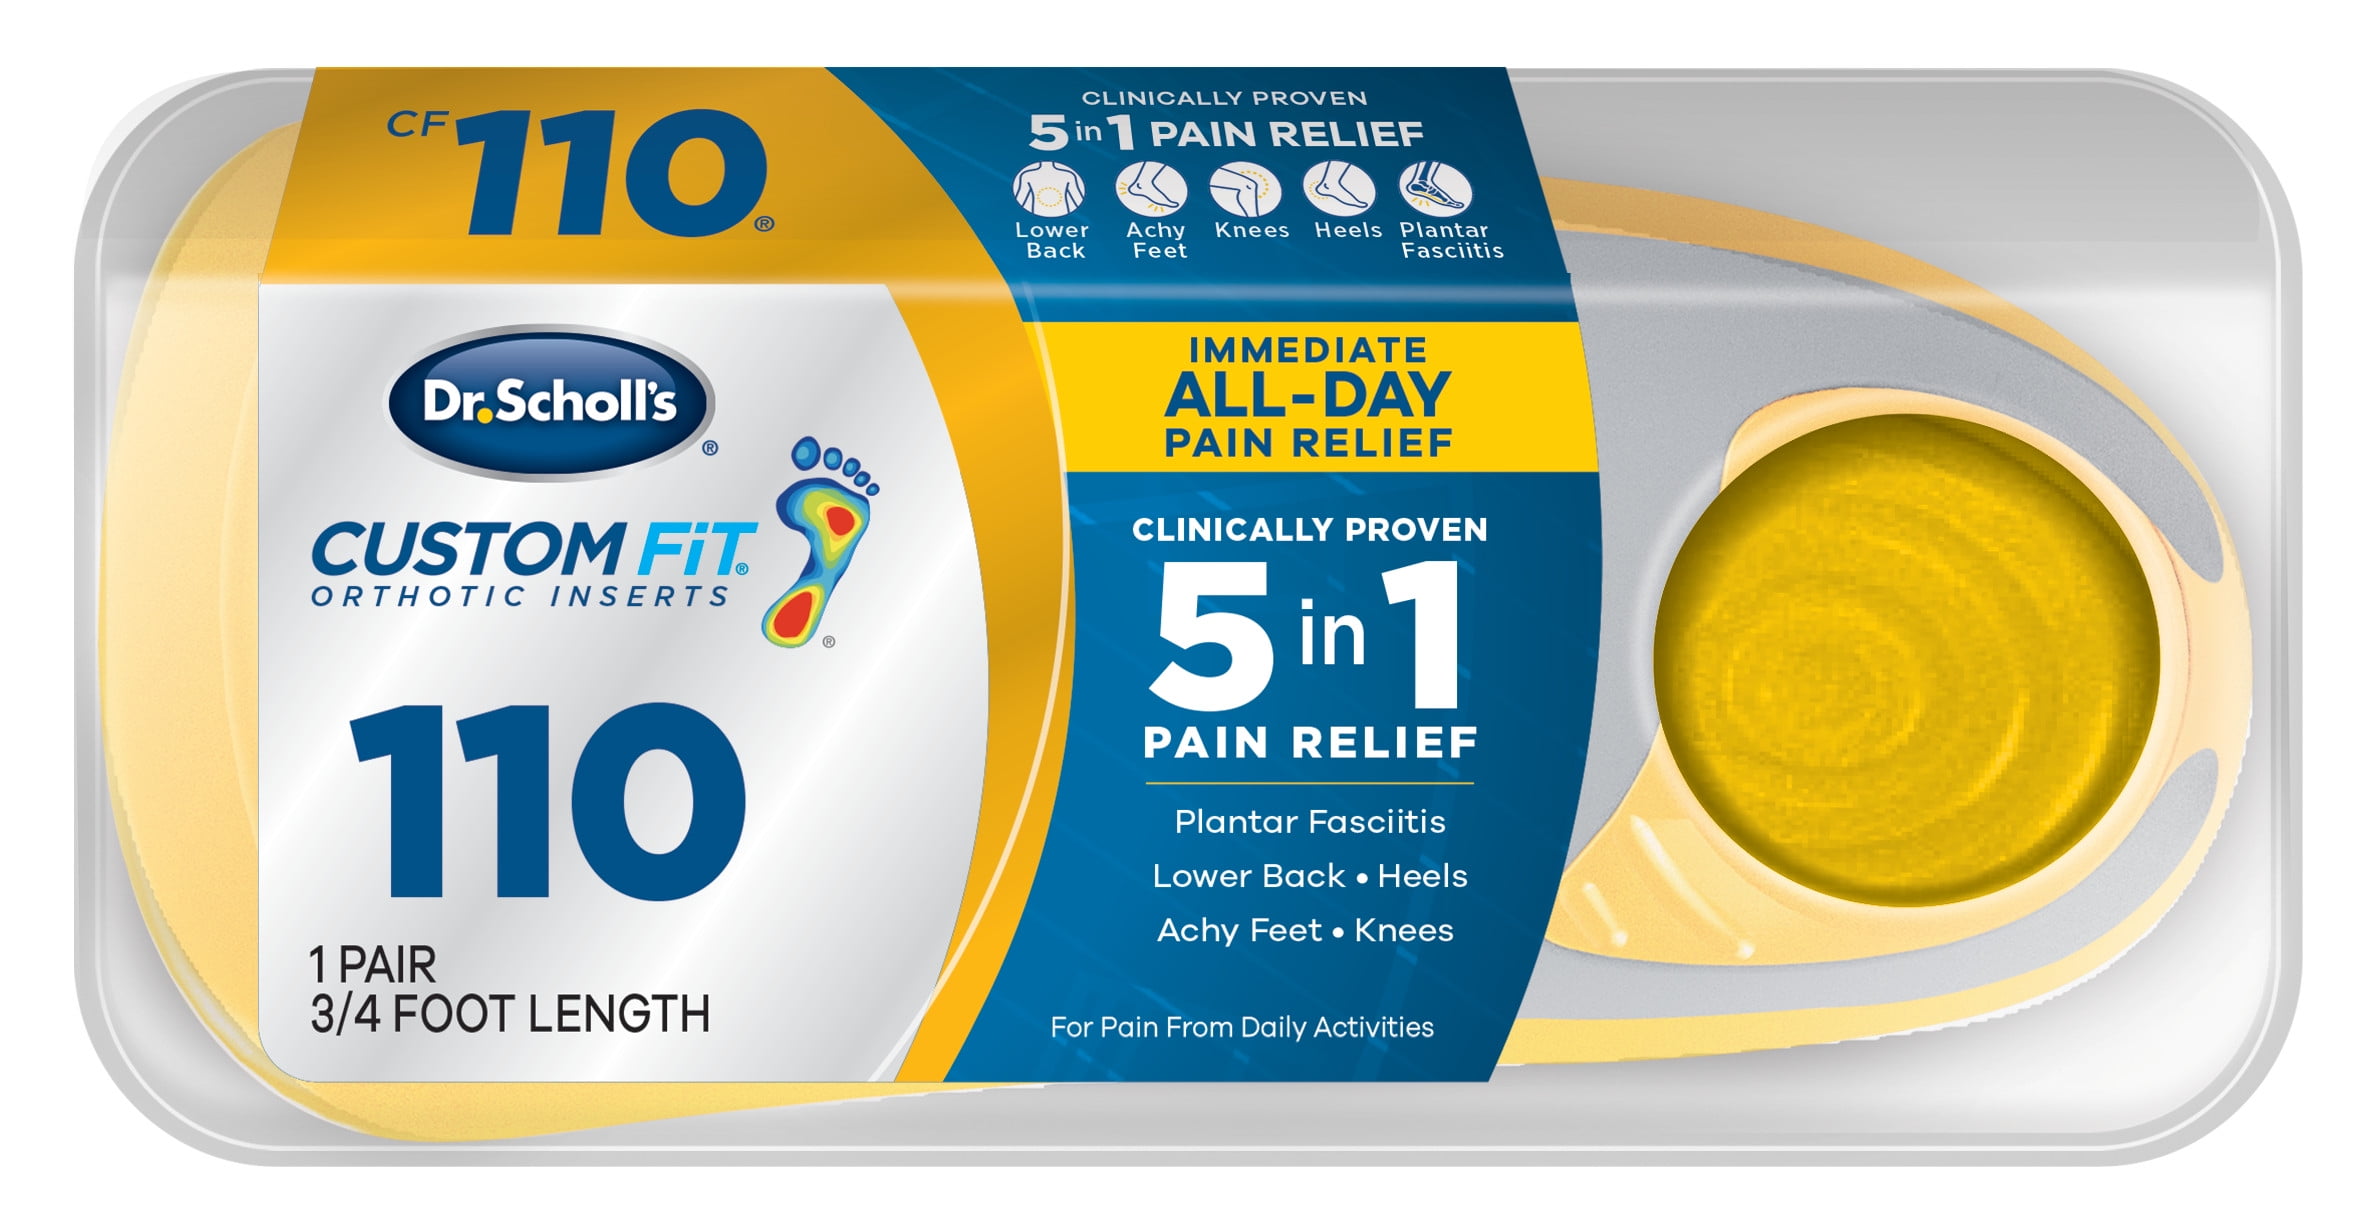 Dr Scholls Custom Fit CF 110 Orthotic Insole Shoe Inserts for Foot Knee and Lower Back Relief 1 Pair